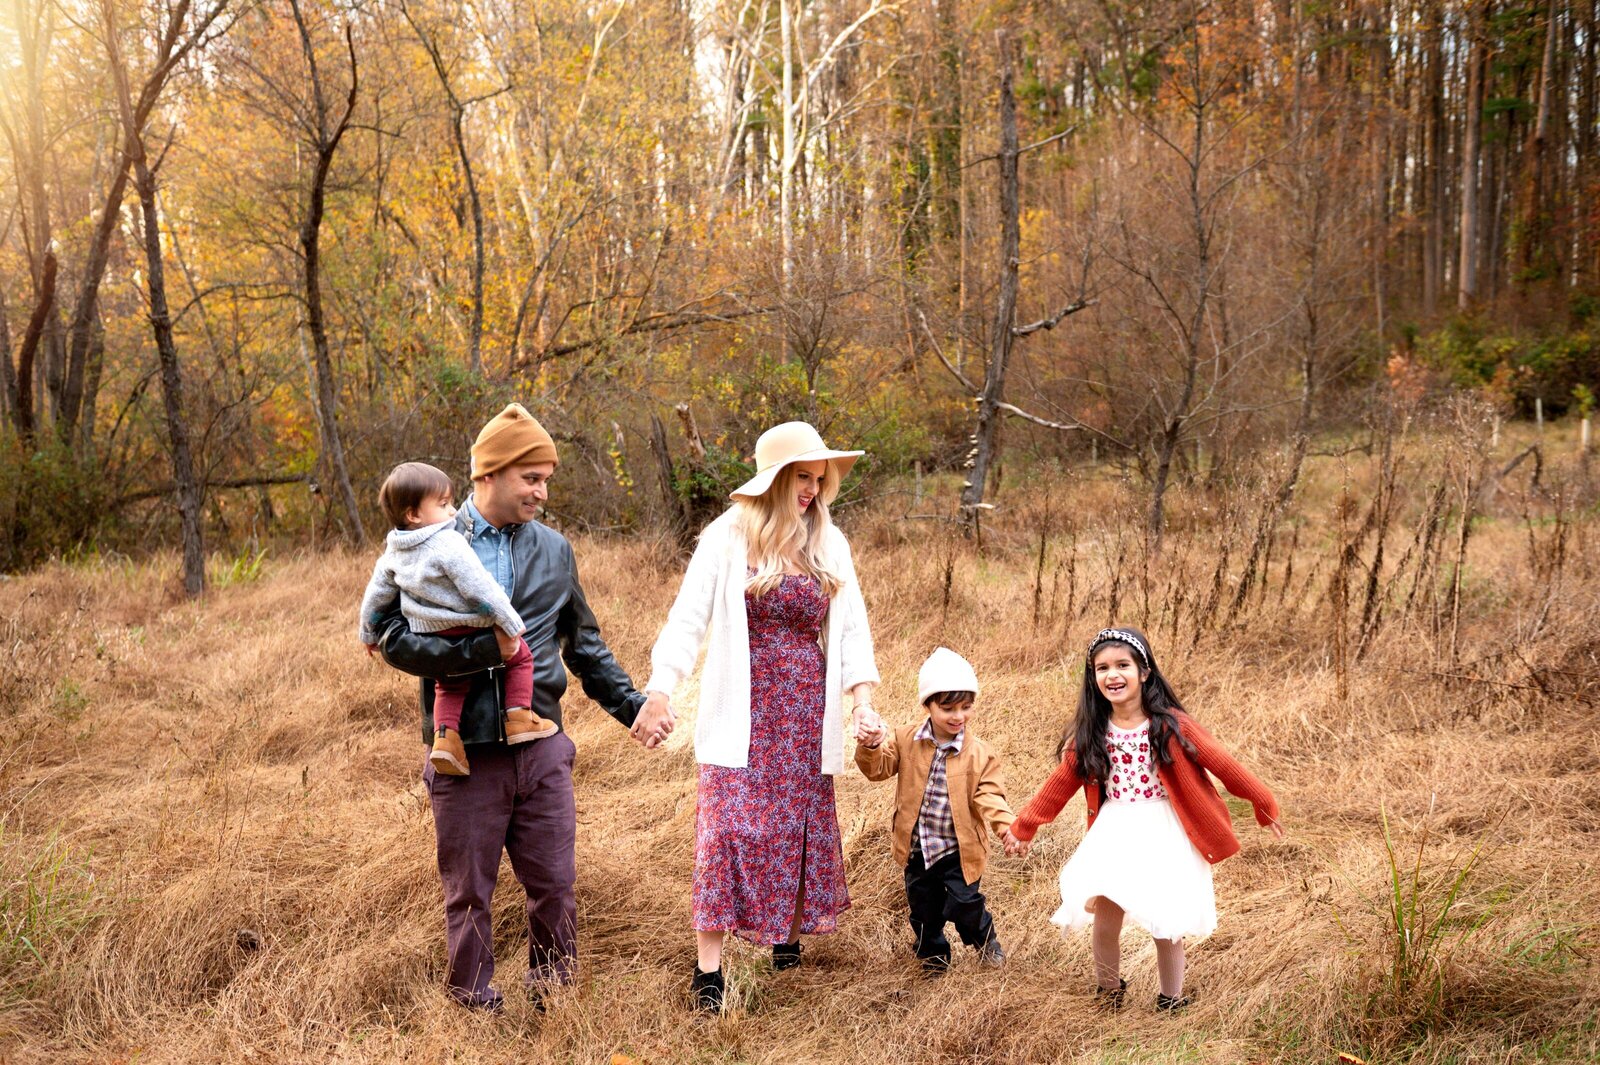 Family of 5 holding hand walking in the grass field